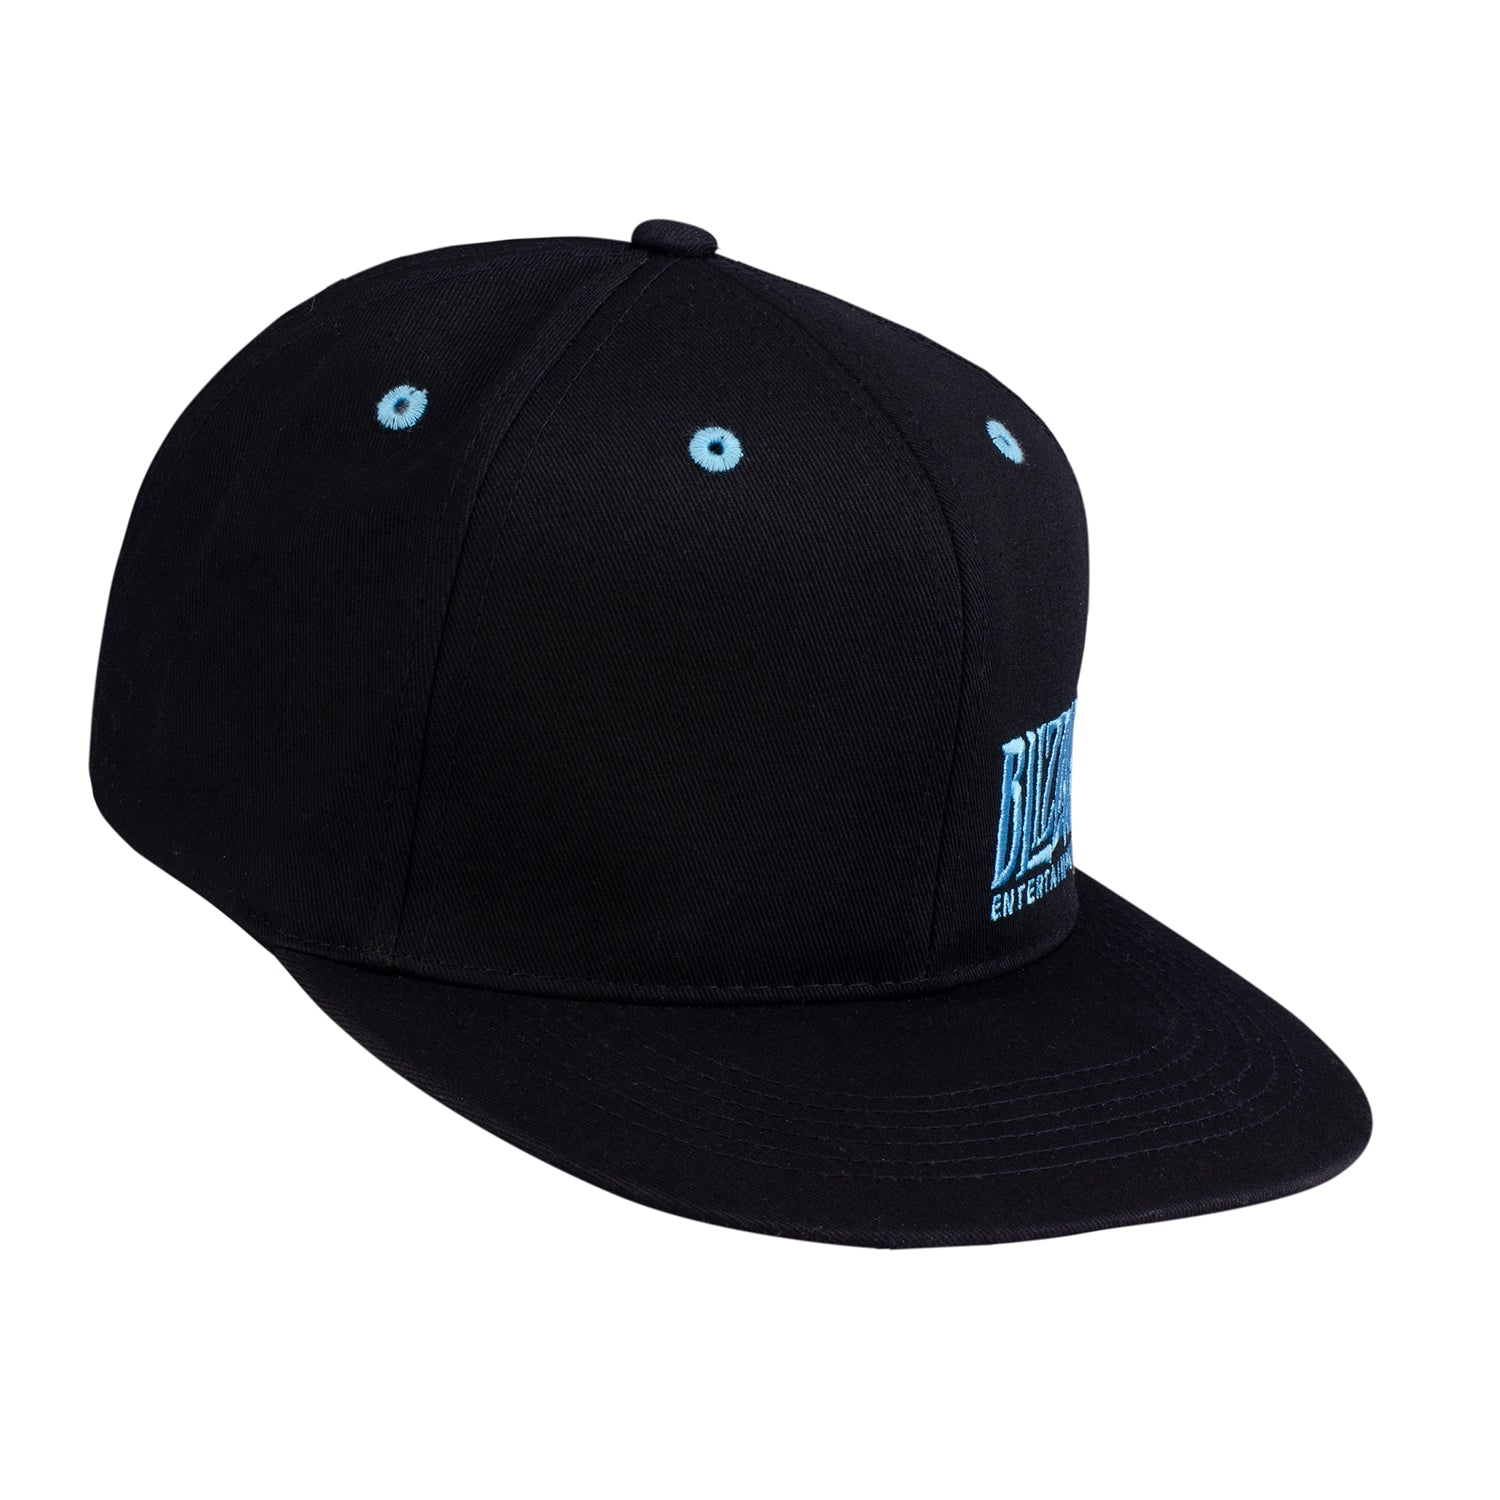 Blizzard Entertainment Black Flatbill Snapback Hat - Front Right View